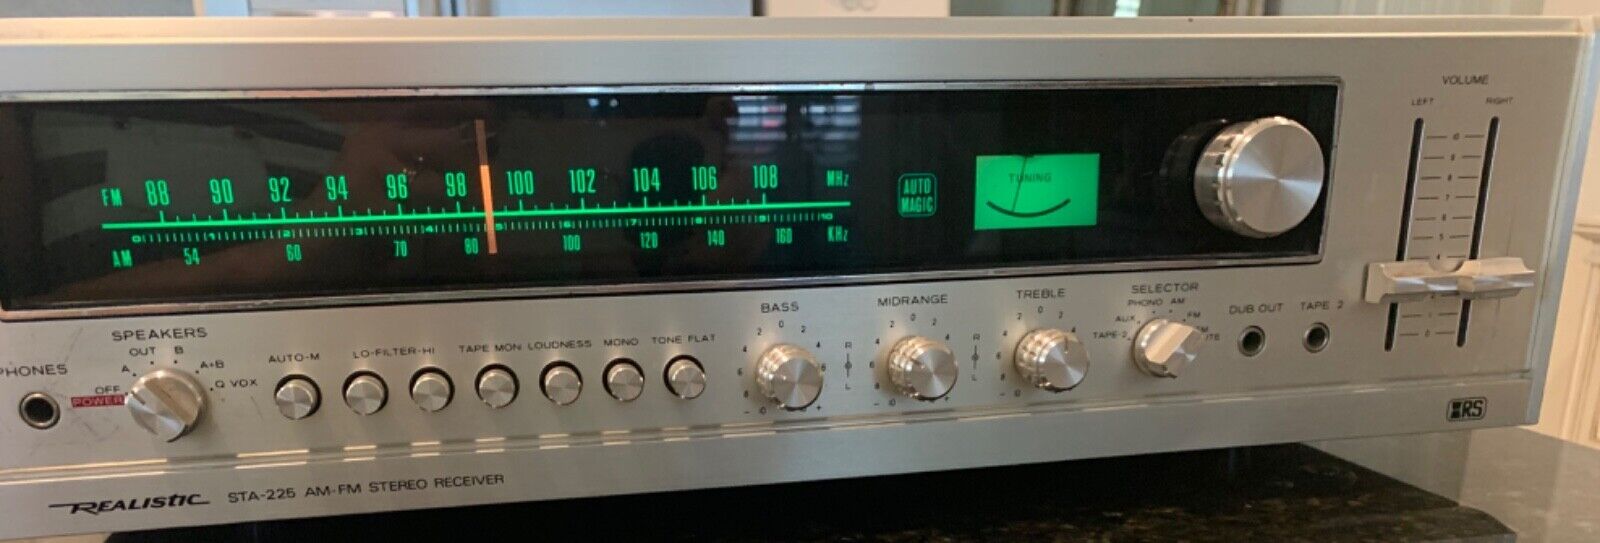 Receiver. STA 225. Realistic Top of the line. Vintage